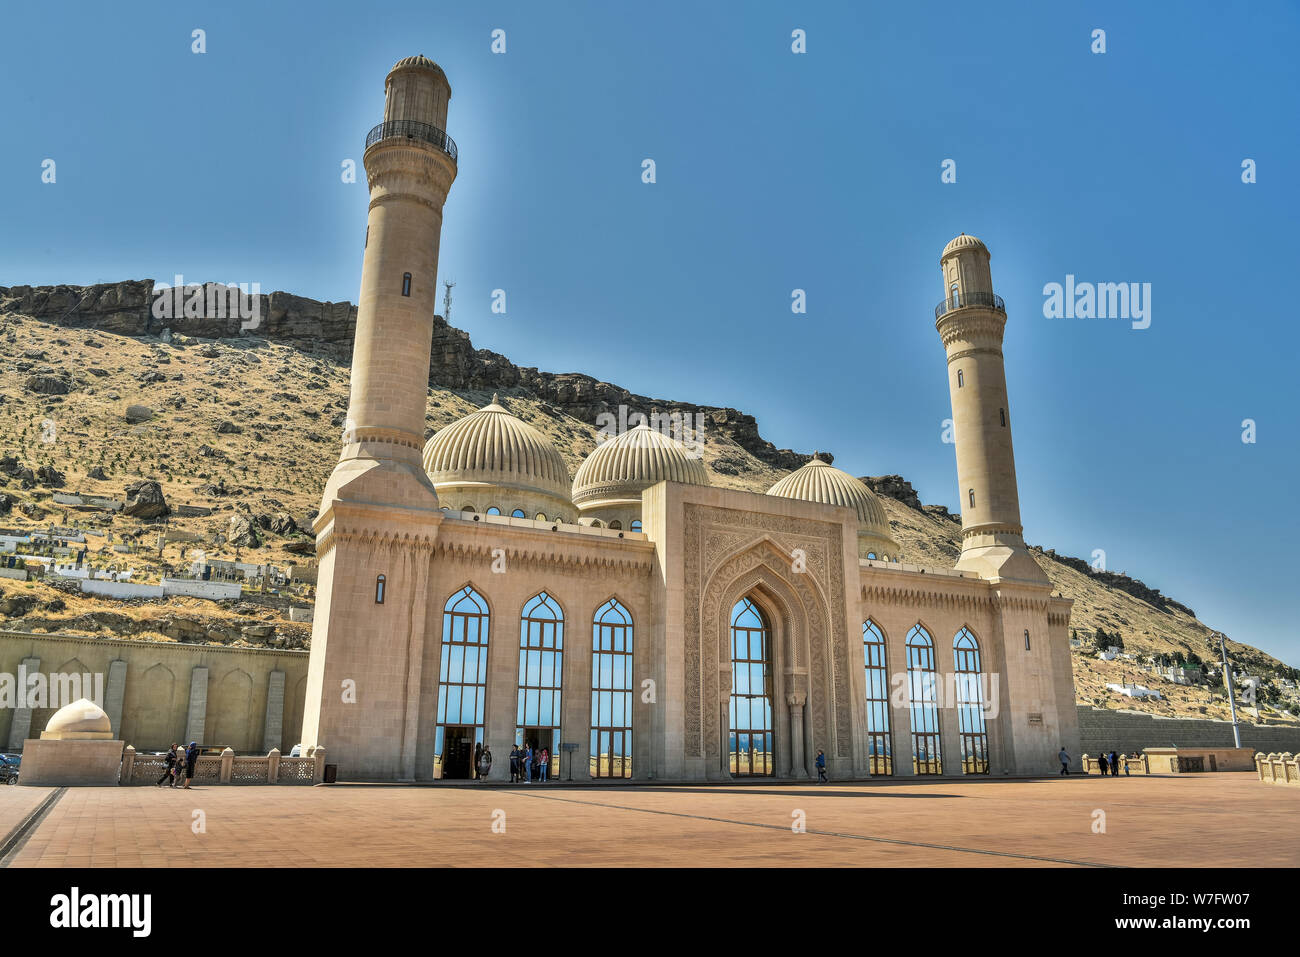 Bibi-Heybat, Baku, Azerbaijan - May 12, 2019. Exterior view of the Bibi-Heybat mosque in Baku, with people. The existing structure, built in the 1990s Stock Photo